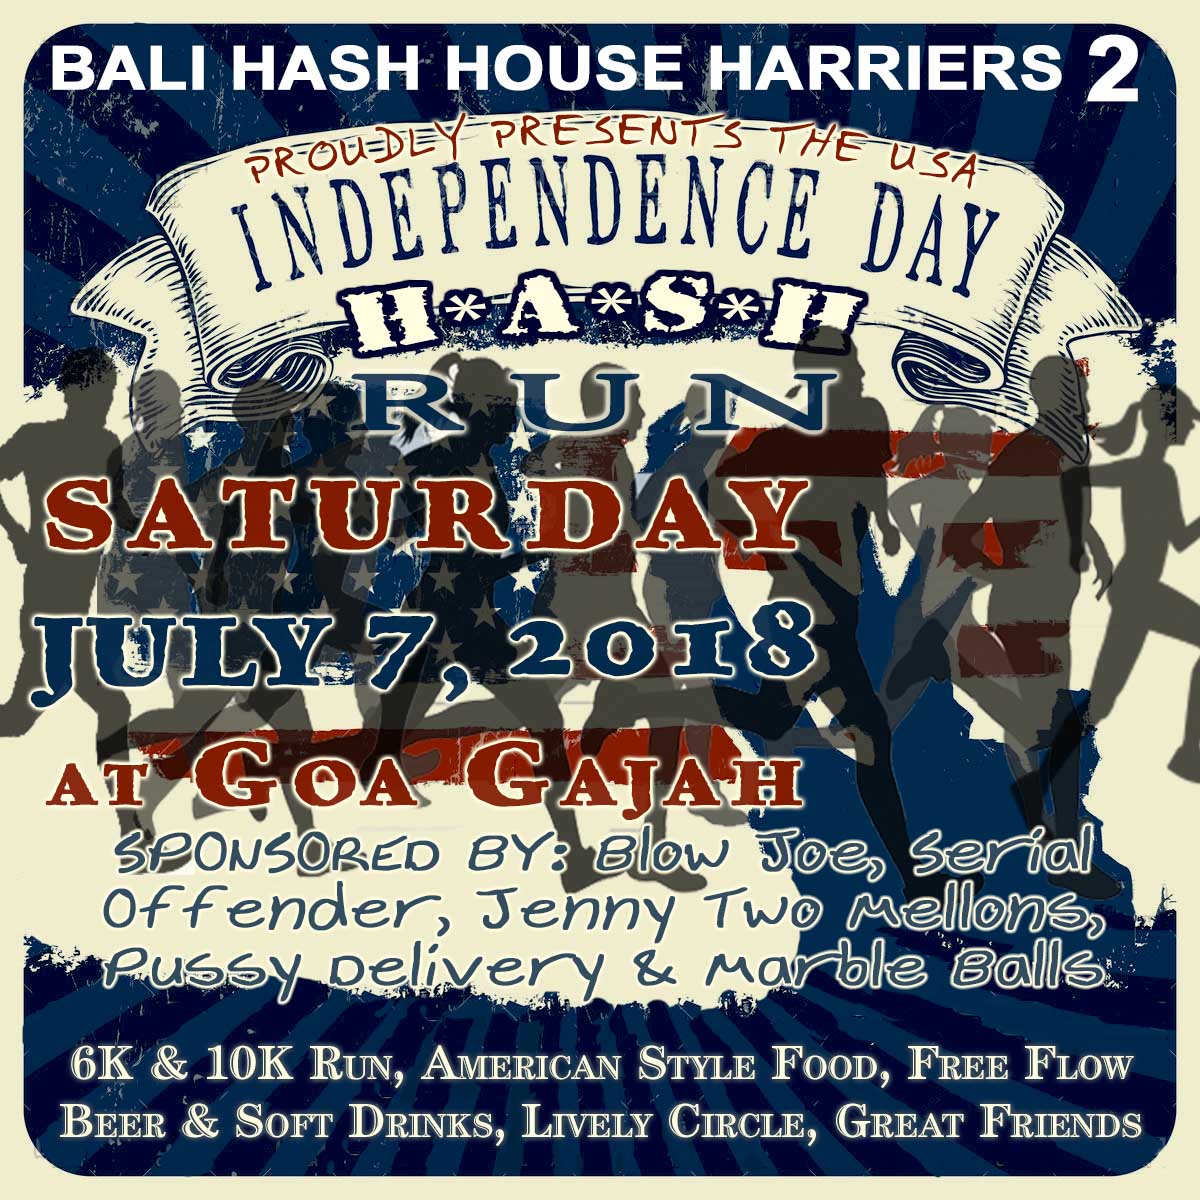 Bali Hash House Harriers 2 US Independence Day Run